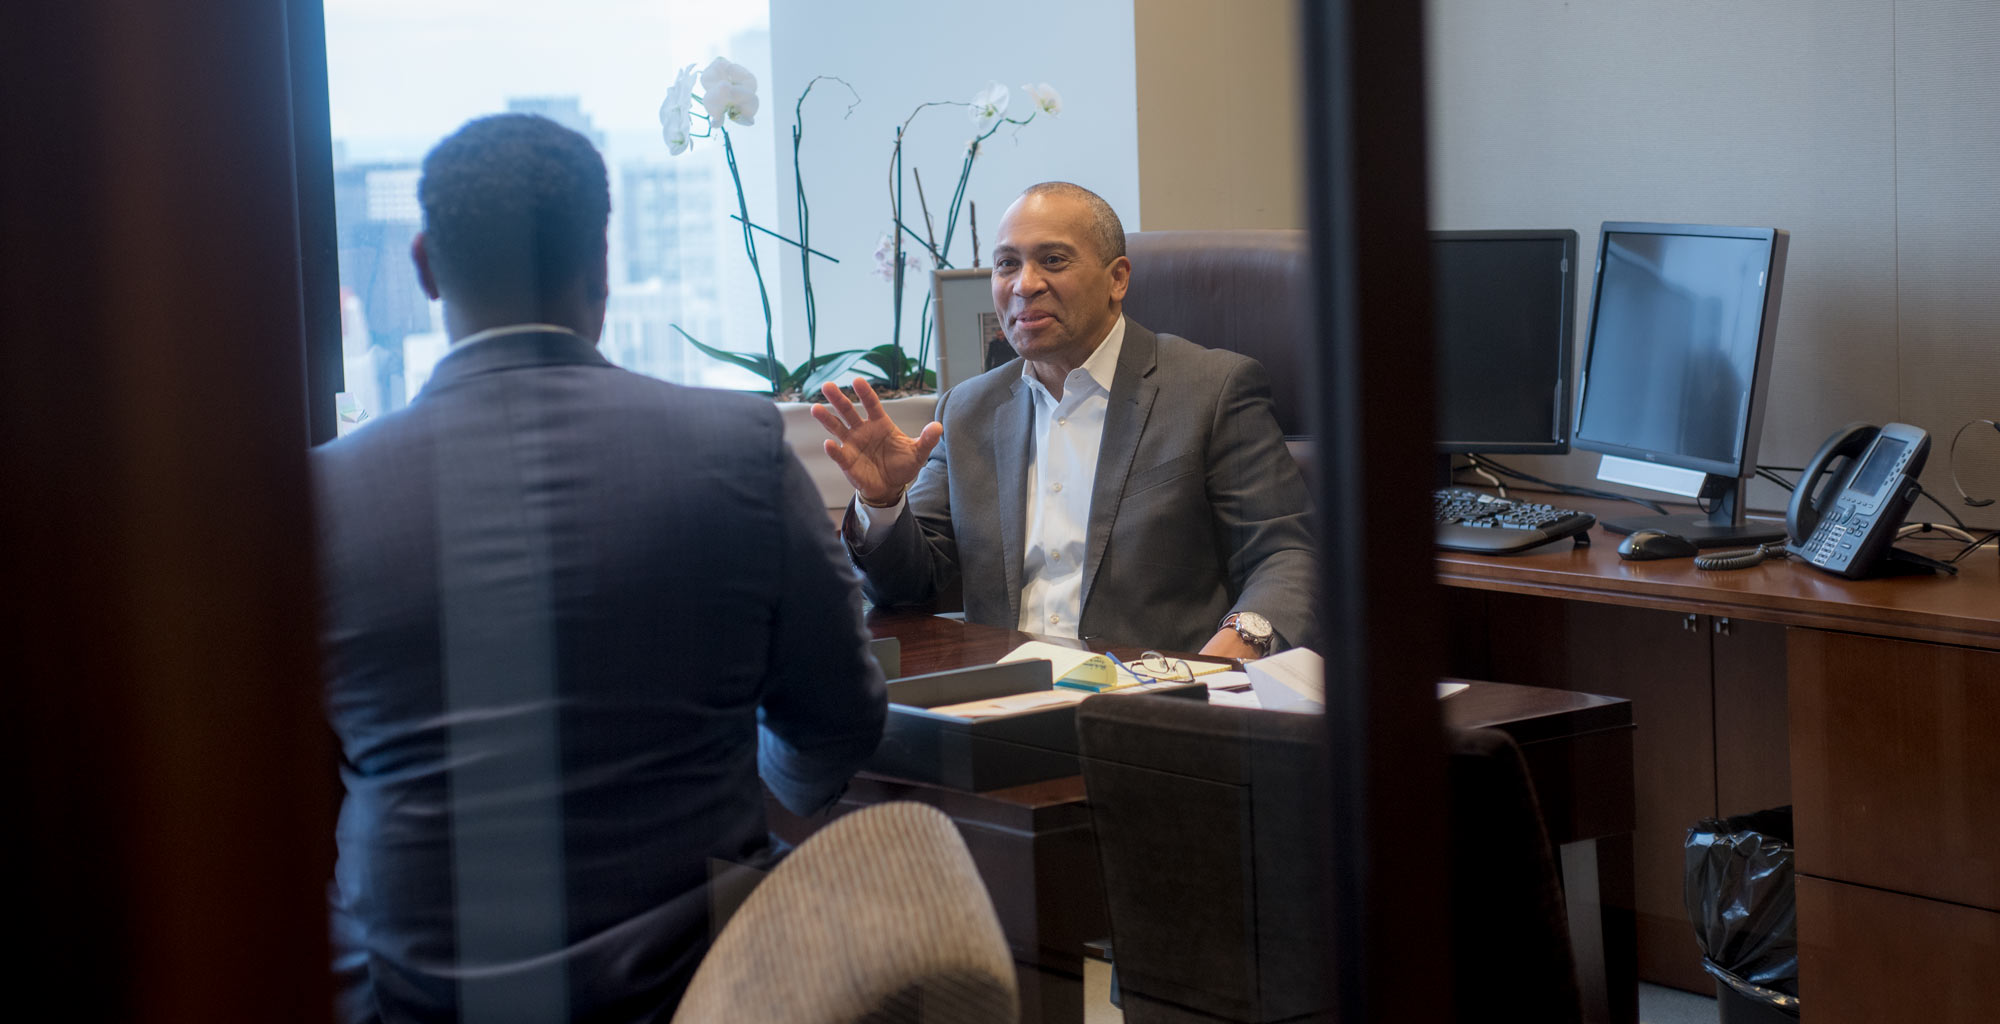 Q&A with Deval Patrick, Managing Director, Bain Capital Double Impact